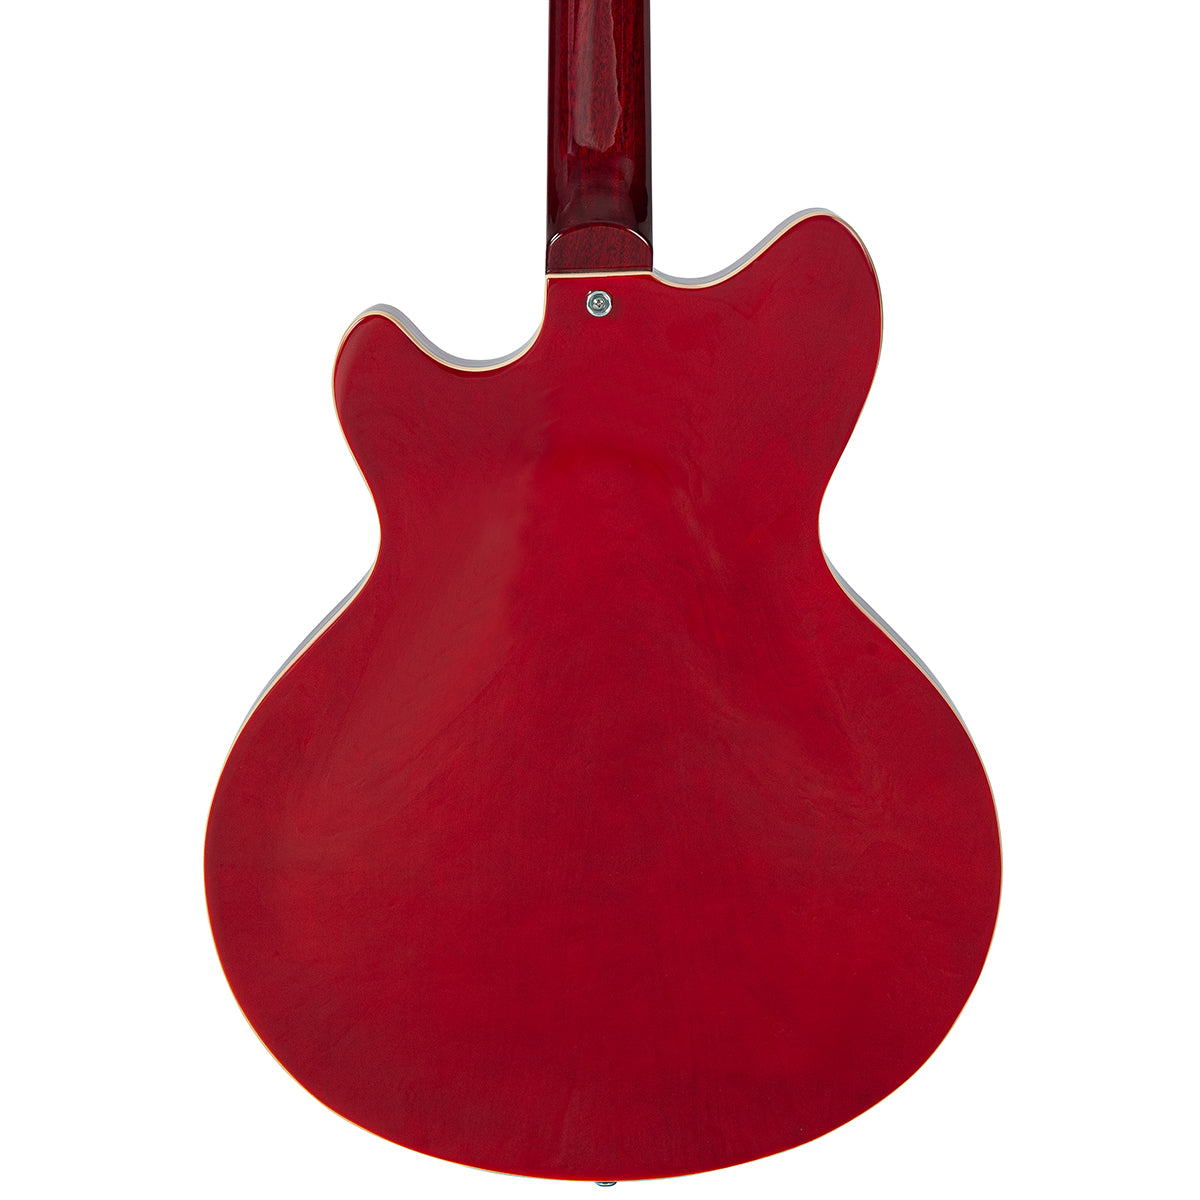 Vintage REVO Series 'Supreme' Semi Acoustic Bass ~ Cherry Red, Electric Guitars for sale at Richards Guitars.